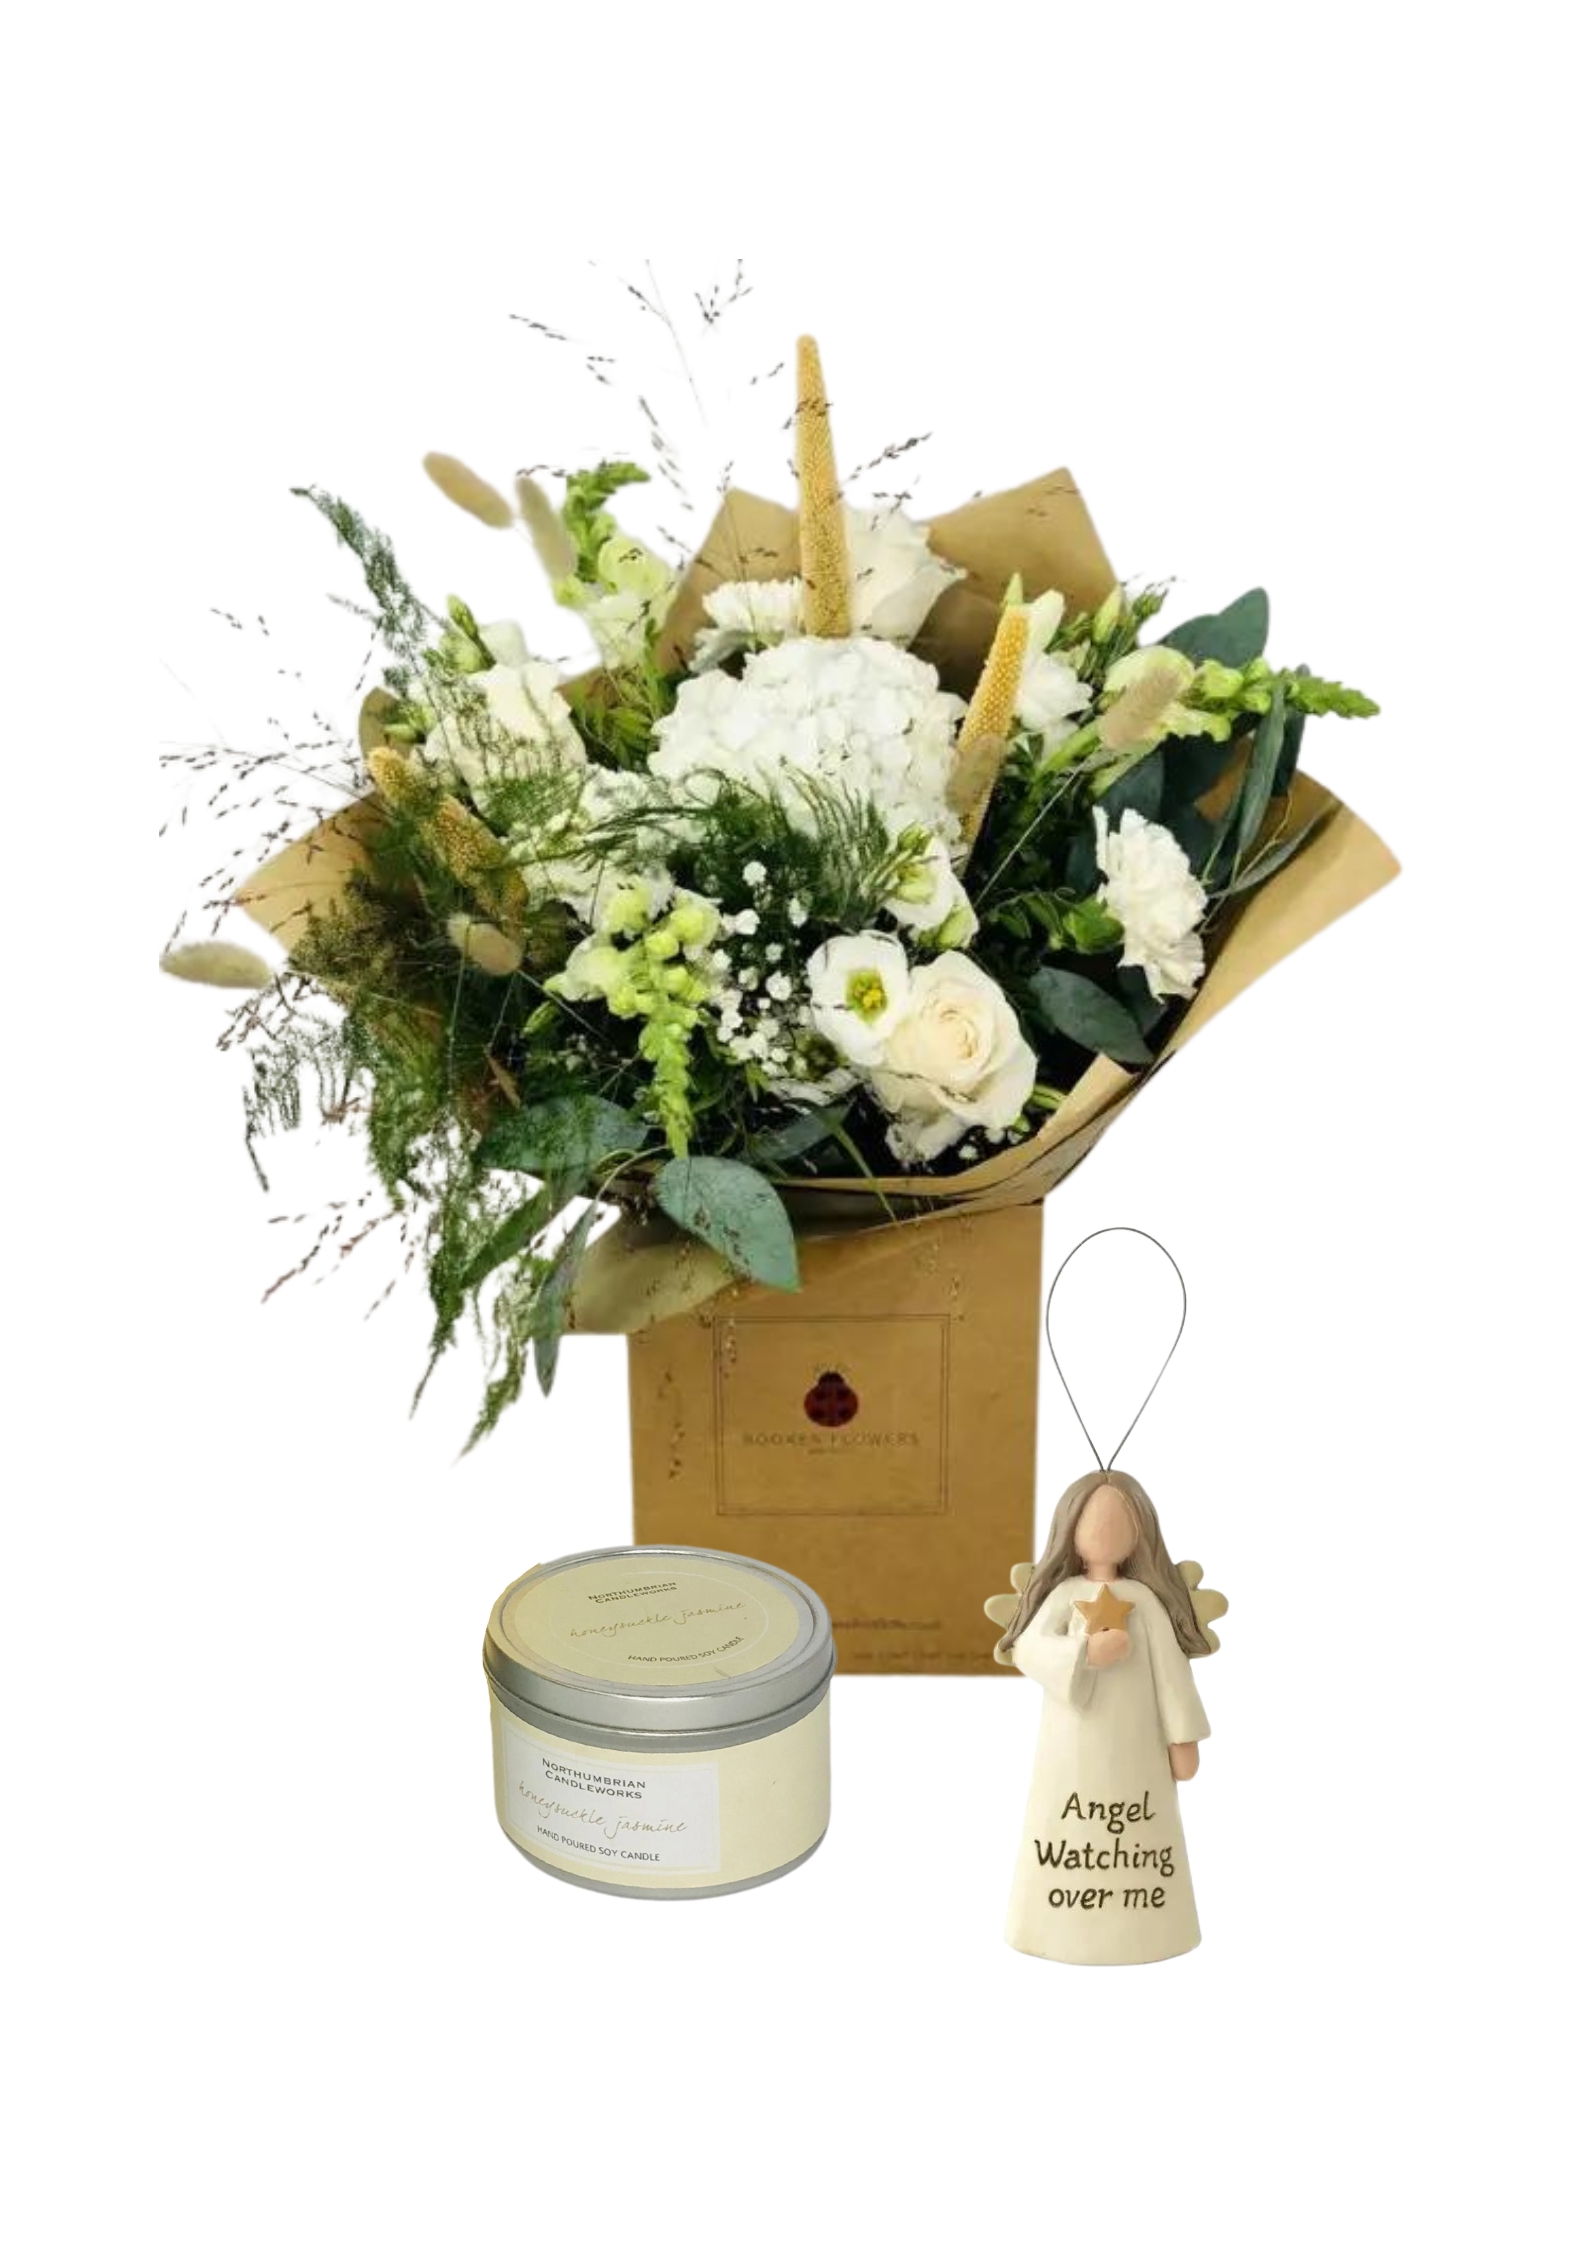 <h2>Beautiful Flowers with Hanging Guardian Angel and Scented Candle Set</h2>
<br>
<ul>
<li>Guardian Angel Gift Set with wooden hanging Guardian Angel</li>
<li>Approximate Dimensions of Bouquet: 50cm x 40cm</li>
<li>Flowers arranged by hand and gift wrapped in our signature eco-friendly packaging and finished off with a hidden wooden ladybird</li>
<li>To give you the best occasionally we may make substitutes</li>
<li>Our flowers backed by our 7 days freshness guarantee</li>
<li>For delivery area coverage see below</li>
</ul>
<br>
<h2>Flower Delivery Coverage</h2>
<p>Our shop delivers flowers to the following Liverpool postcodes L1 L2 L3 L4 L5 L6 L7 L8 L11 L12 L13 L14 L15 L16 L17 L18 L19 L24 L25 L26 L27 L36 L70 If your order is for an area outside of these we can organise delivery for you through our network of florists. We will ask them to make as close as possible to the image but because of the difference in stock and sundry items it may not be exact.</p>
<br>
<h2>Hand-tied Bouquet | Gift Set</h2>
<p>This Guardian Angel Gift Set contains a beautiful white bouquet which is hand-arranged by our professional florists together with an eco-friendly soy scented candle in White Gardenia which comes in a stylish tin. Together with a wooden hanging Guardian Angel by designer Gisela Graham.</p>
<br>
<p>Handtied bouquets are a lovely display of fresh flowers that have the wow factor. The advantage of having a bouquet made this way is that they are artfully arranged by our florists and tied so that they stay in the display.</p>
<br>
<p>They are then gift wrapped and aqua packed in a water bubble so that at no point are the flowers out of water. This means they look their very best on the day they arrive and continue to delight for days after.</p>
<br>
<p>Being delivered in a transporter box and in water means the recipient does not need to put the flowers in a vase straight away they can just put them down and enjoy.</p>
<br>
<p>The large bouquet features 3 large white hydrangeas, 4 white large-headed roses, 1 white Oriental lily and 3 white alstroemeria together with mixed seasonal foliage.</p>
<br>
<h2>Eco-Friendly Liverpool Florists</h2>
<p>As florists we feel very close earth and want to protect it. Plastic waste is a huge problem in the florist industry so we made the decision to make our packaging eco-friendly.</p>
<p>To achieve this we worked with our packaging supplier to remove the lamination off our boxes and wrap the tops in an Eco Flowerwrap which means it easily compostable or can be fully recycled.</p>
<p>Once you have finished enjoying your flowers from us they will go back into growing more flowers! Only a small amount of plastic is used as a water bubble and this is biodegradable.</p>
<p>Even the sachet of flower food included with your bouquet is compostable.</p>
<p>All our bouquets have small wooden ladybird hidden amongst them so do not forget to spot the ladybird and post a picture on our social media pages to enter our rolling competition.</p>
<br>
<h2>Flowers Guaranteed for 7 Days</h2>
<p>Our 7-day freshness guarantee should give you confidence that we will only send out good quality flowers.</p>
<p>Leave it in our hands we will create a marvellous bouquet which will not only look good on arrival but will continue to delight as the flowers bloom.</p>
<br>
<h2>Liverpool Flower Delivery</h2>
<p>We are open 7 days a week and offer advanced booking flower delivery same-day flower delivery 3-hour flower delivery. Guaranteed AM PM or Evening Flower Delivery and also offer Sunday Flower Delivery.</p>
<p>Our florists deliver in Liverpool and can provide flowers for you in Liverpool Merseyside. And through our network of florists can organise flower deliveries for you nationwide.</p>
<br>
<h2>The Best Florist in Liverpool your local Liverpool Flower Shop</h2>
<p>Come to Booker Flowers and Gifts Liverpool for your beautiful flowers and plants. For that bit of extra luxury we also offer a lovely range of finishing touches such as wines champagne locally crafted Gin and Rum Vases Scented Candles and Chocolates that can be delivered with your flowers.</p>
<p>To see the full range see our extras section.</p>
<p>You can trust Booker Flowers and Gifts of delivery the very best for you.</p>
<p><br /><br /></p>
<p><em>5 Star review on Yell.com</em></p>
<br>
<p><em>Thank you Gemma for your fabulous service. The flowers are of the highest quality and delivered with a warm smile. My sister was delighted. Ordering was simple and the communications were top-notch. I will definitely use your services again.</em></p>